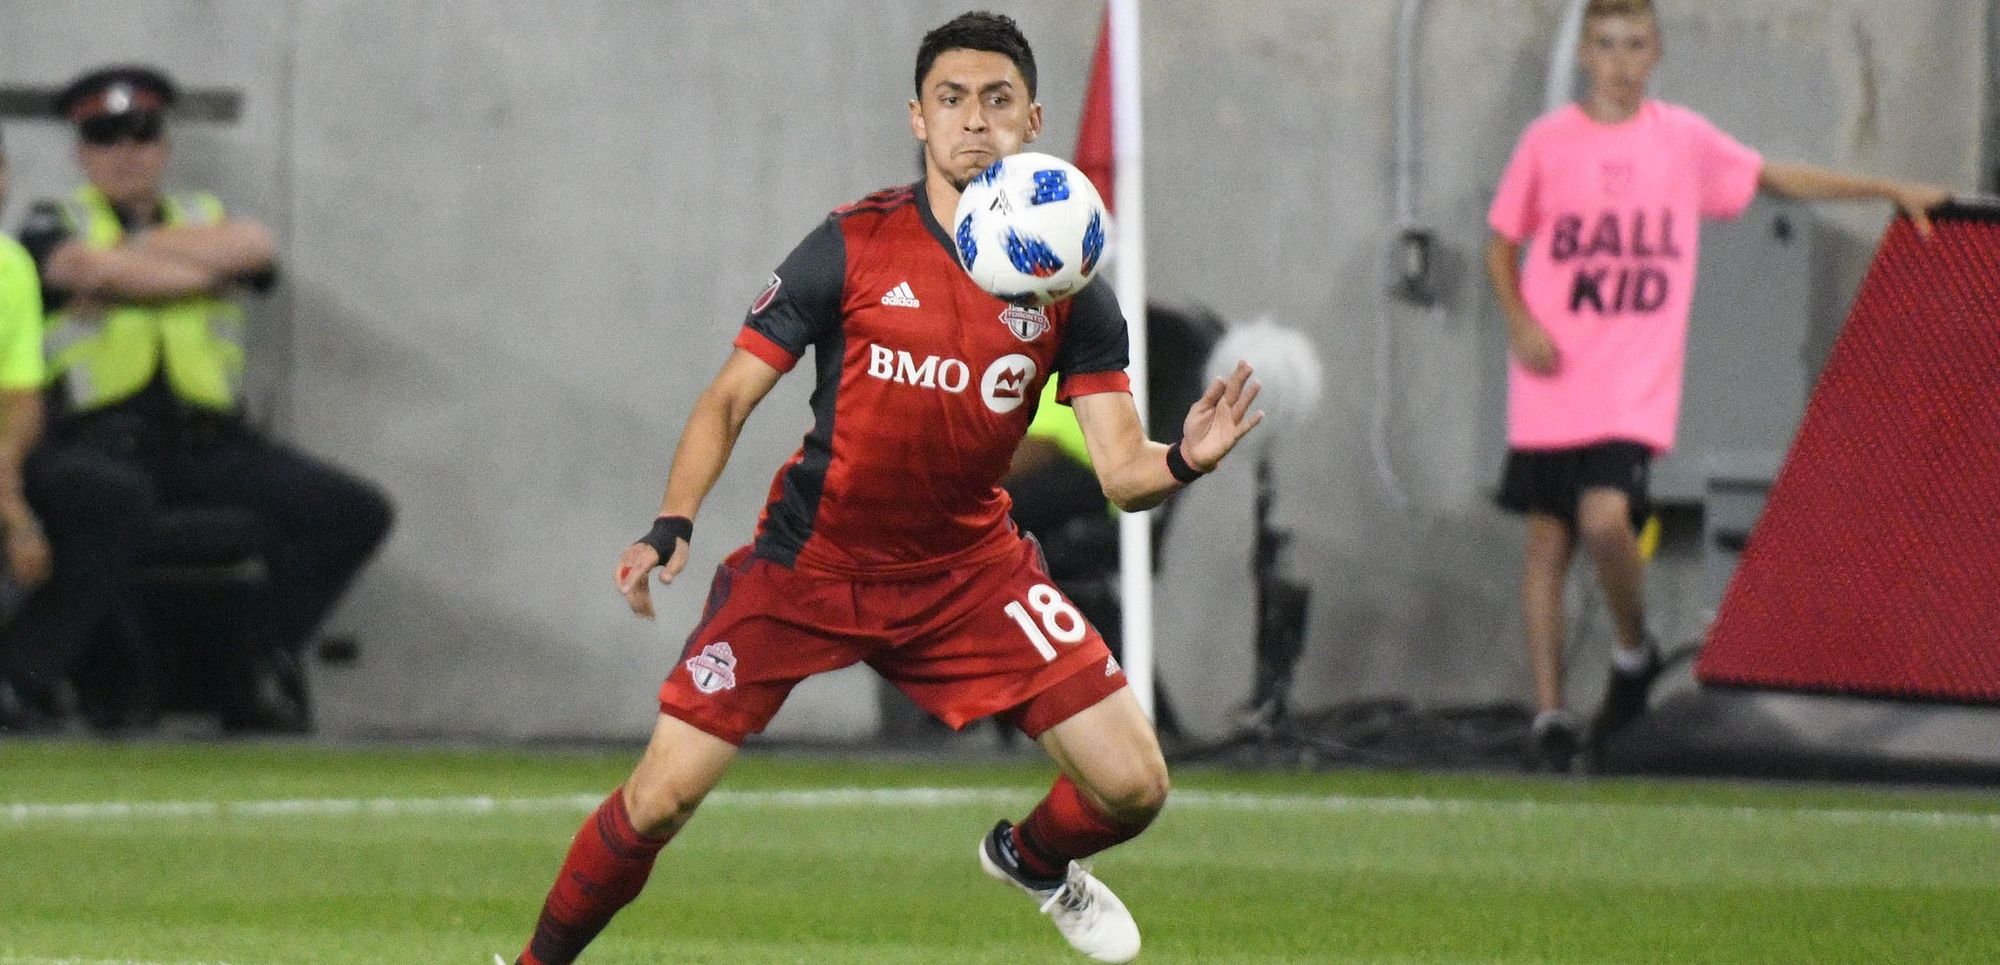 Tactical breakdown: How did Mark Delgado become expendable at Toronto FC?